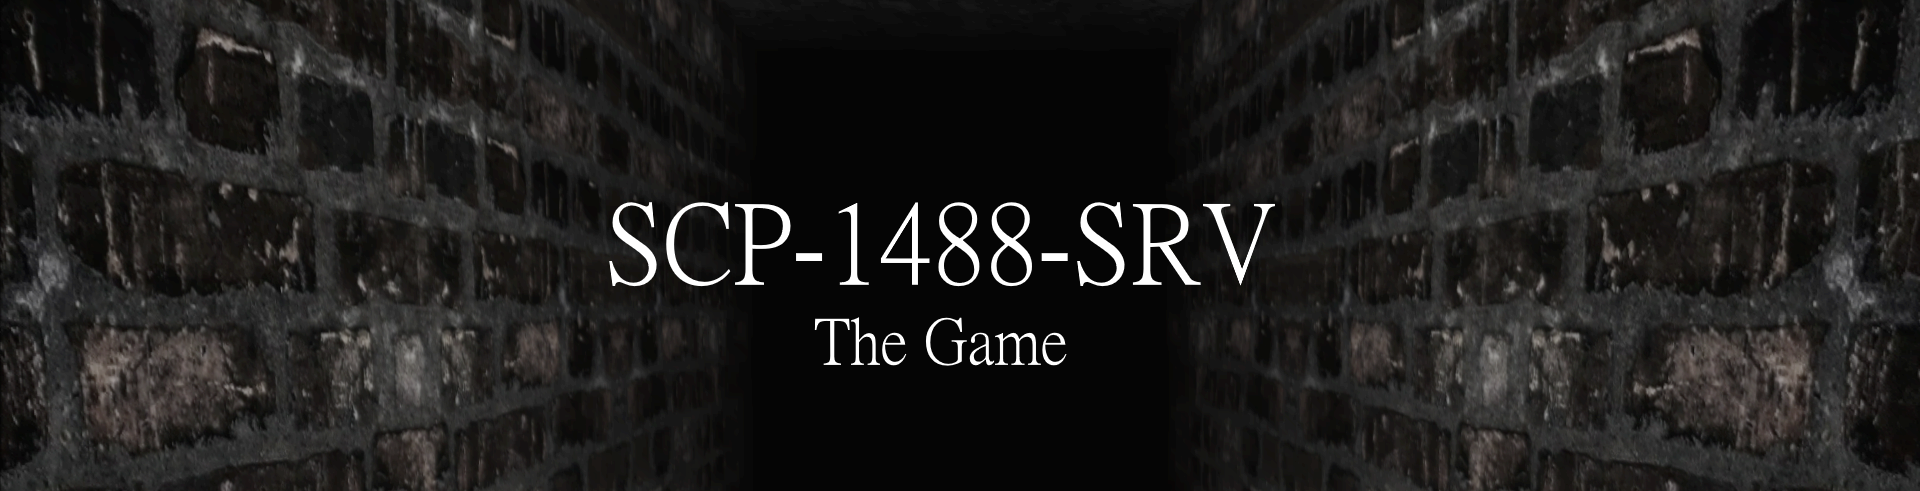 SCP 1488-SRV: The Game